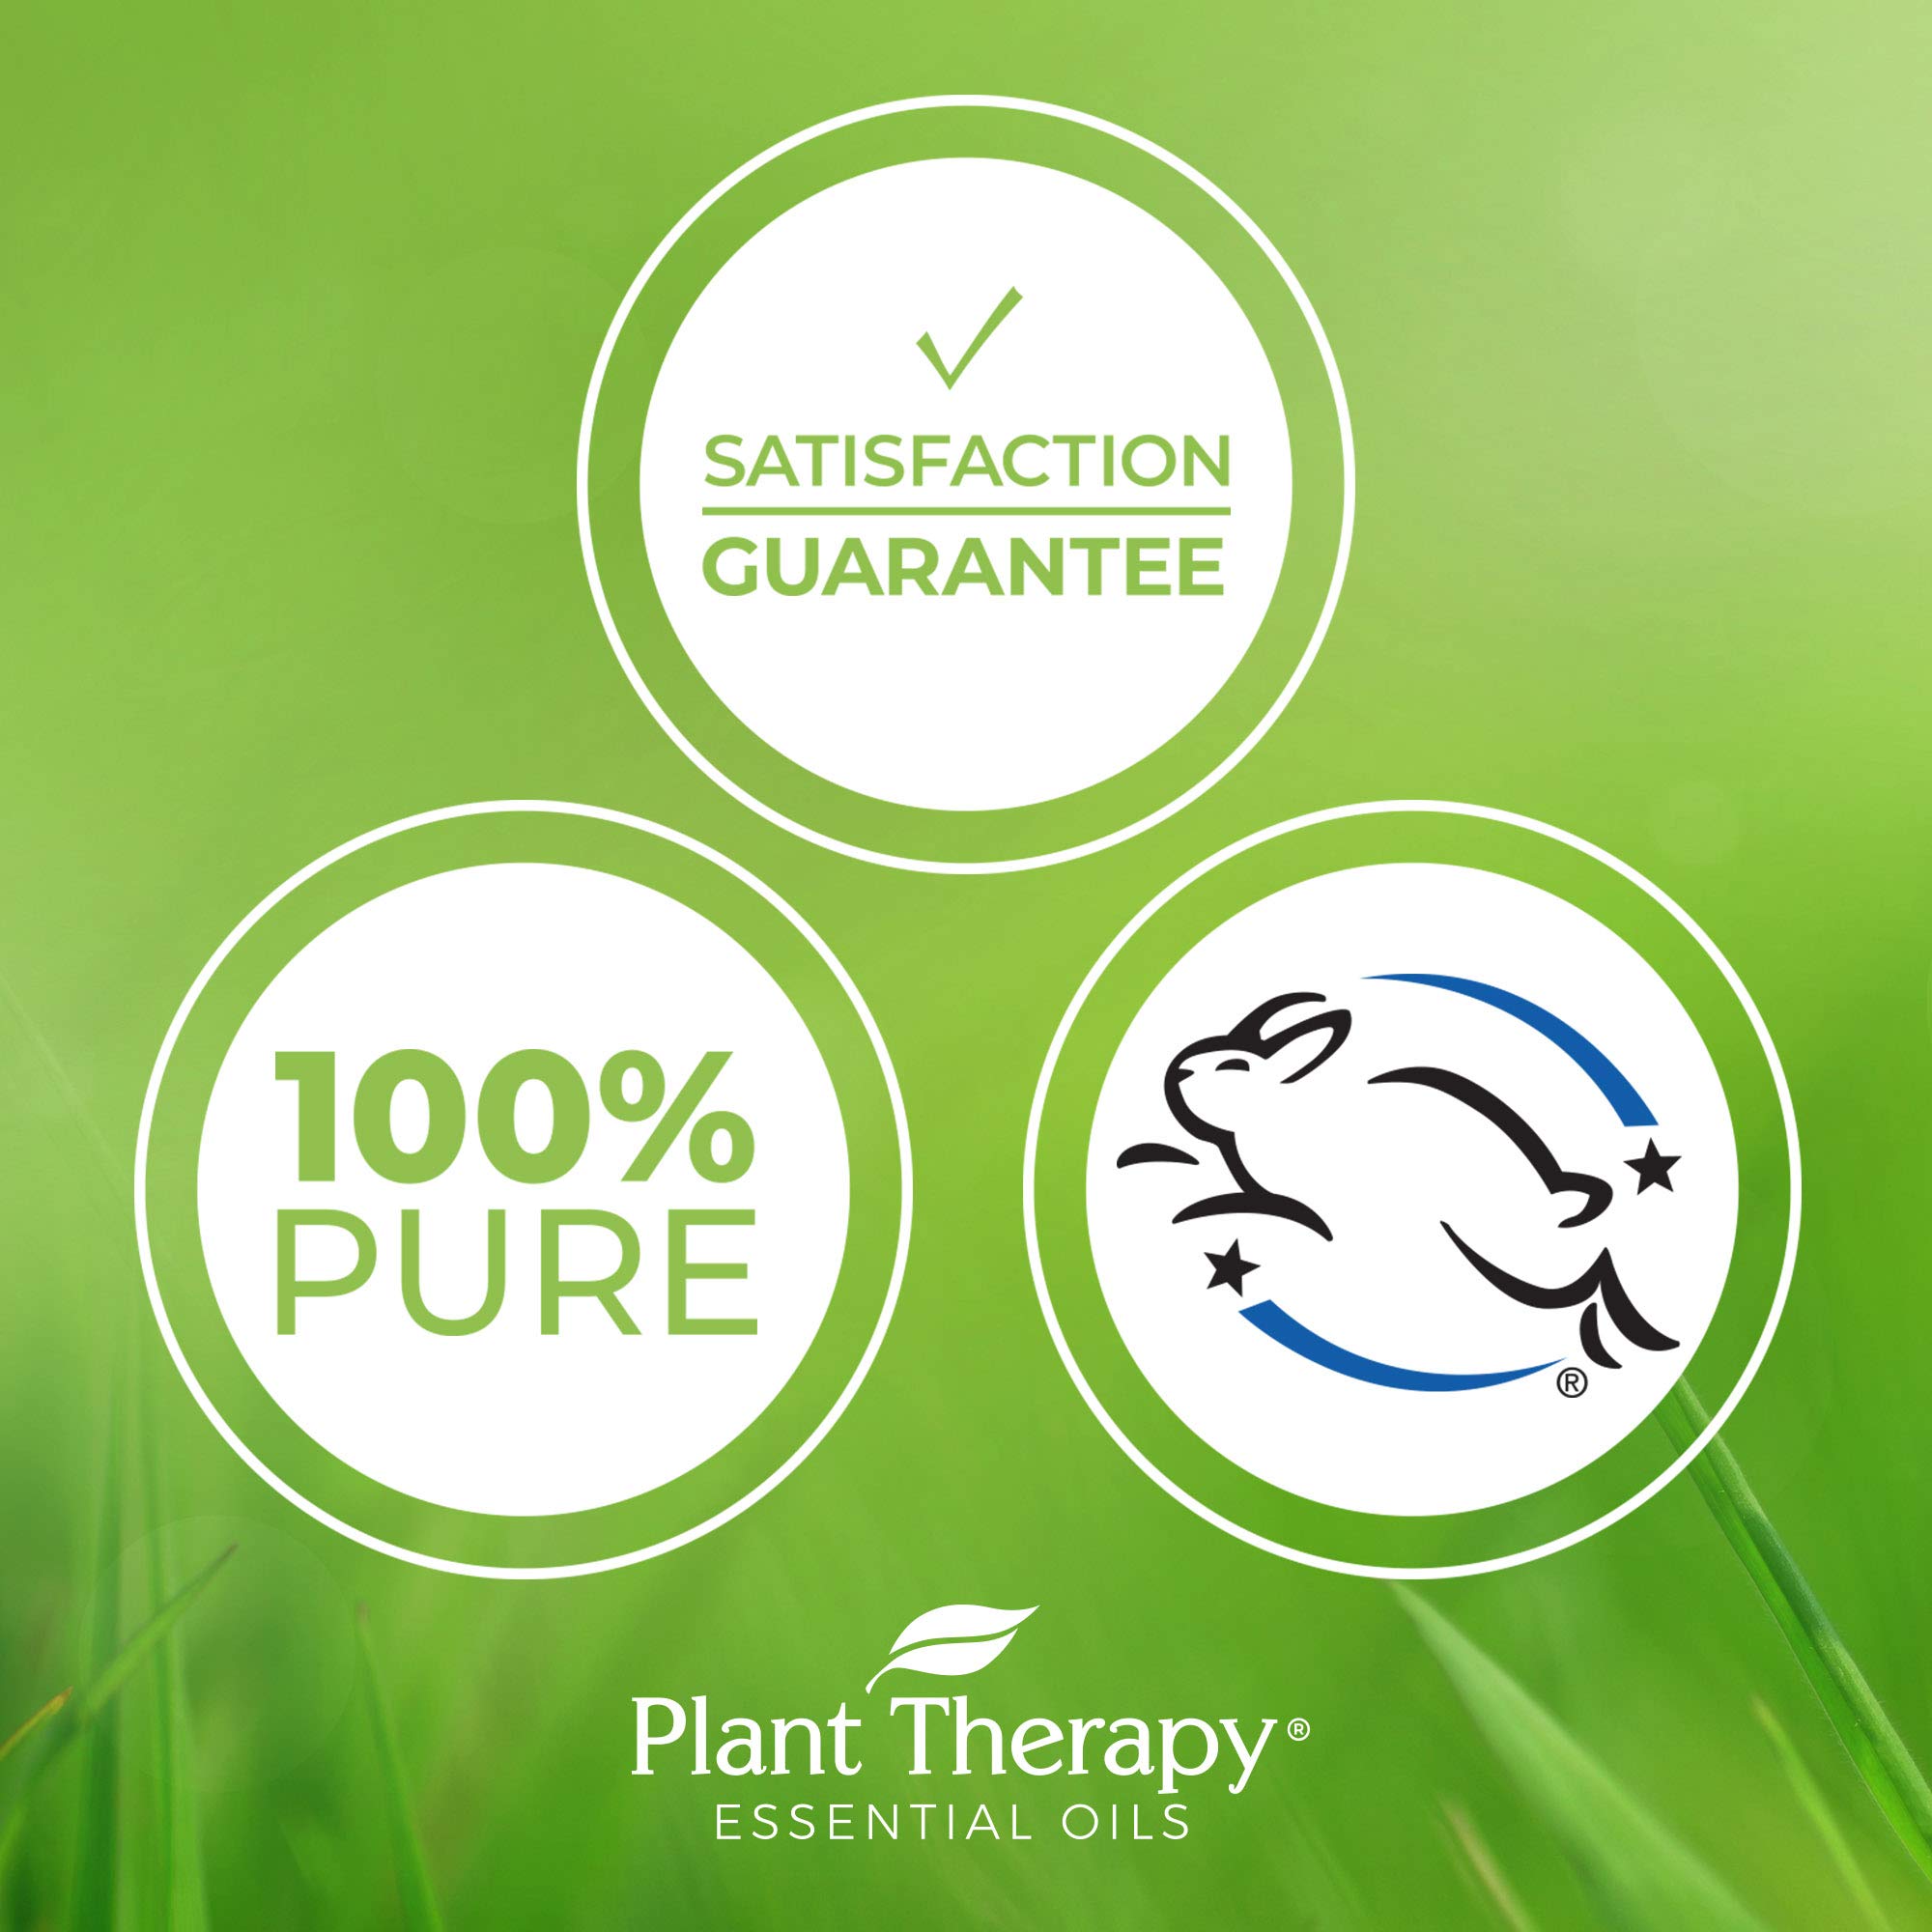 Plant Therapy Sensual Essential Oil Blend for Couples, Massage, Desire 100% Pure, Pre-Diluted Roll-On, Natural Aromatherapy, Therapeutic Grade 10 mL (1/3 oz)